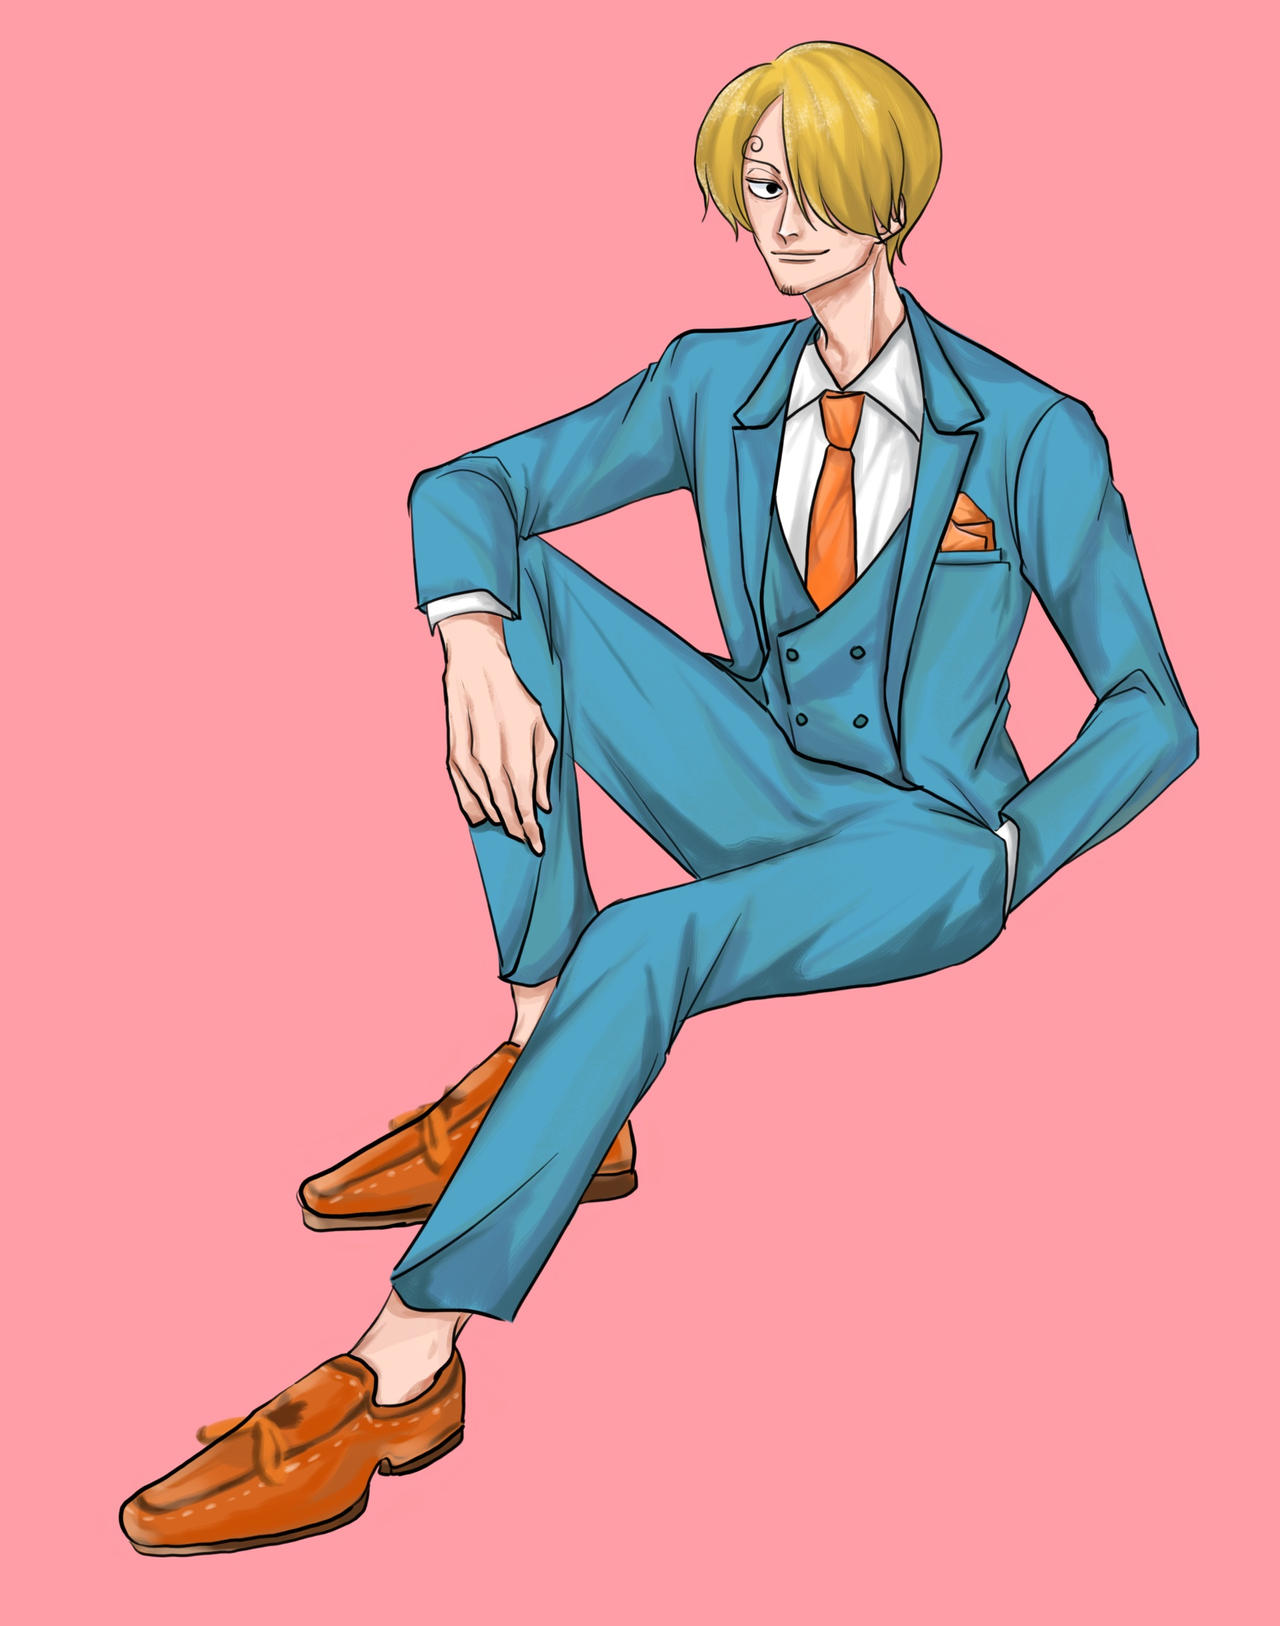 COMMISSION, Sanji in Blue suit by holybaqon on DeviantArt